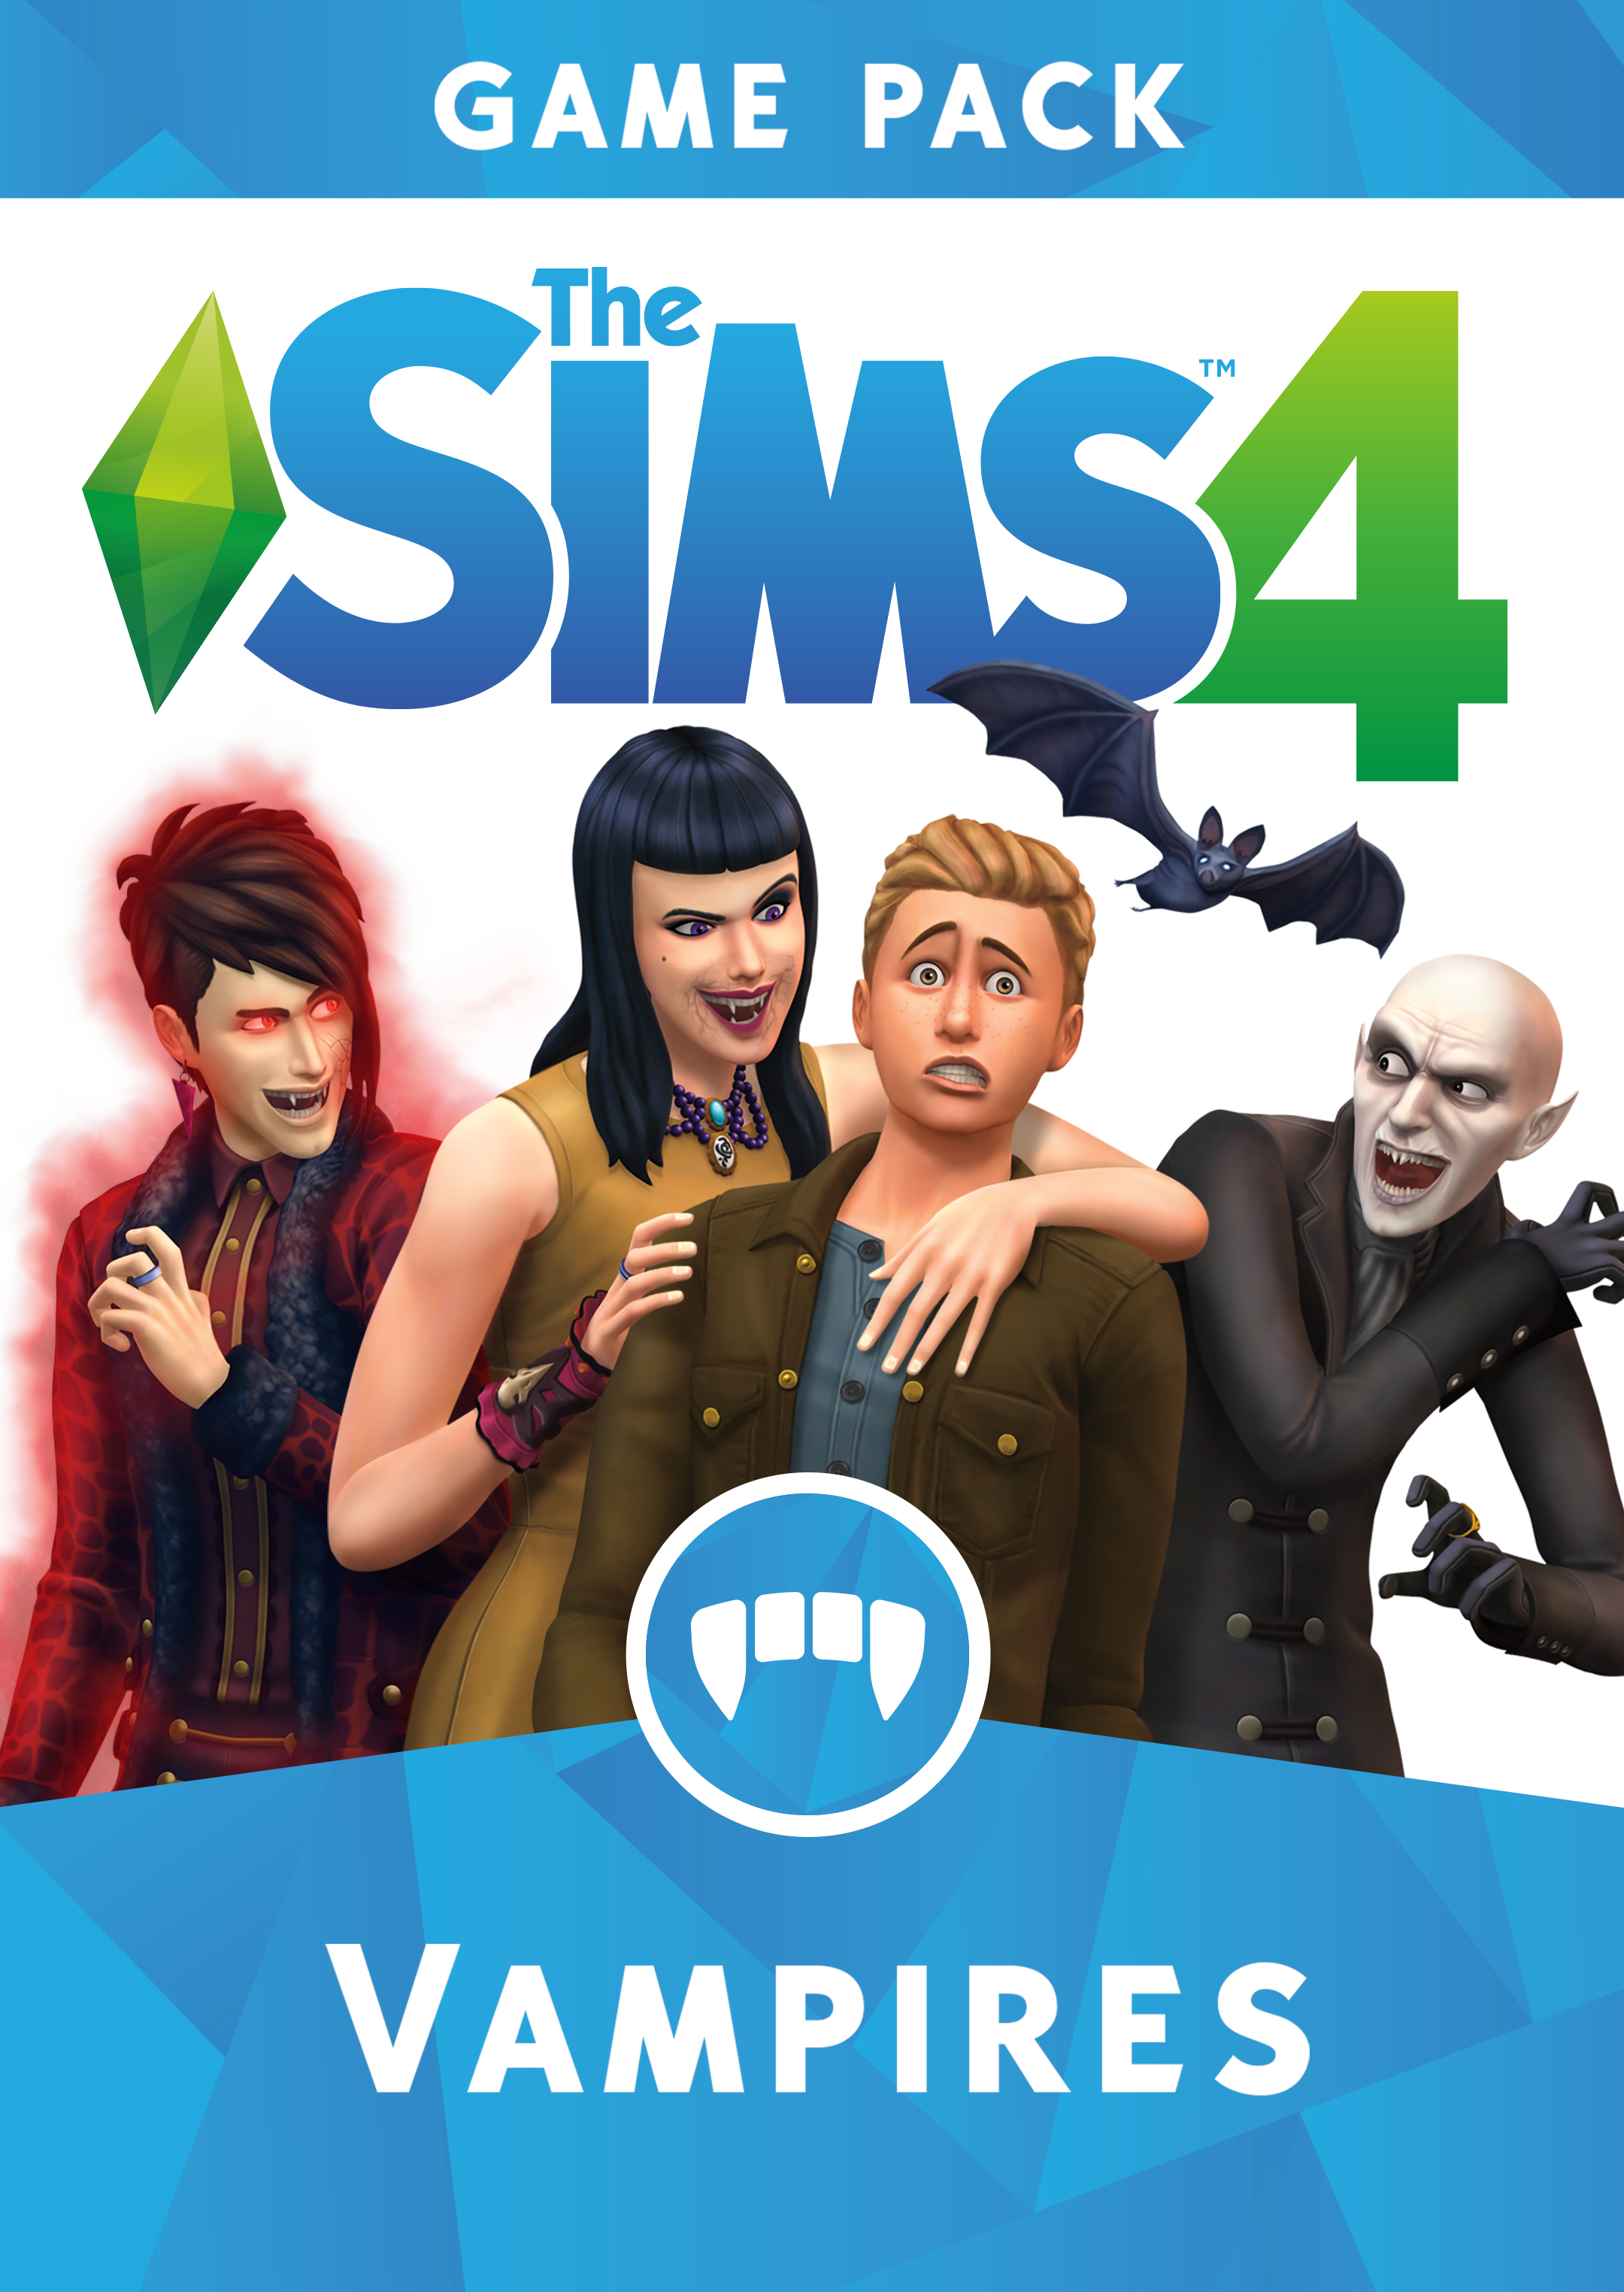 The Sims 4 Vampires Game Pack: Official Box Art, Logo, and Renders ...
